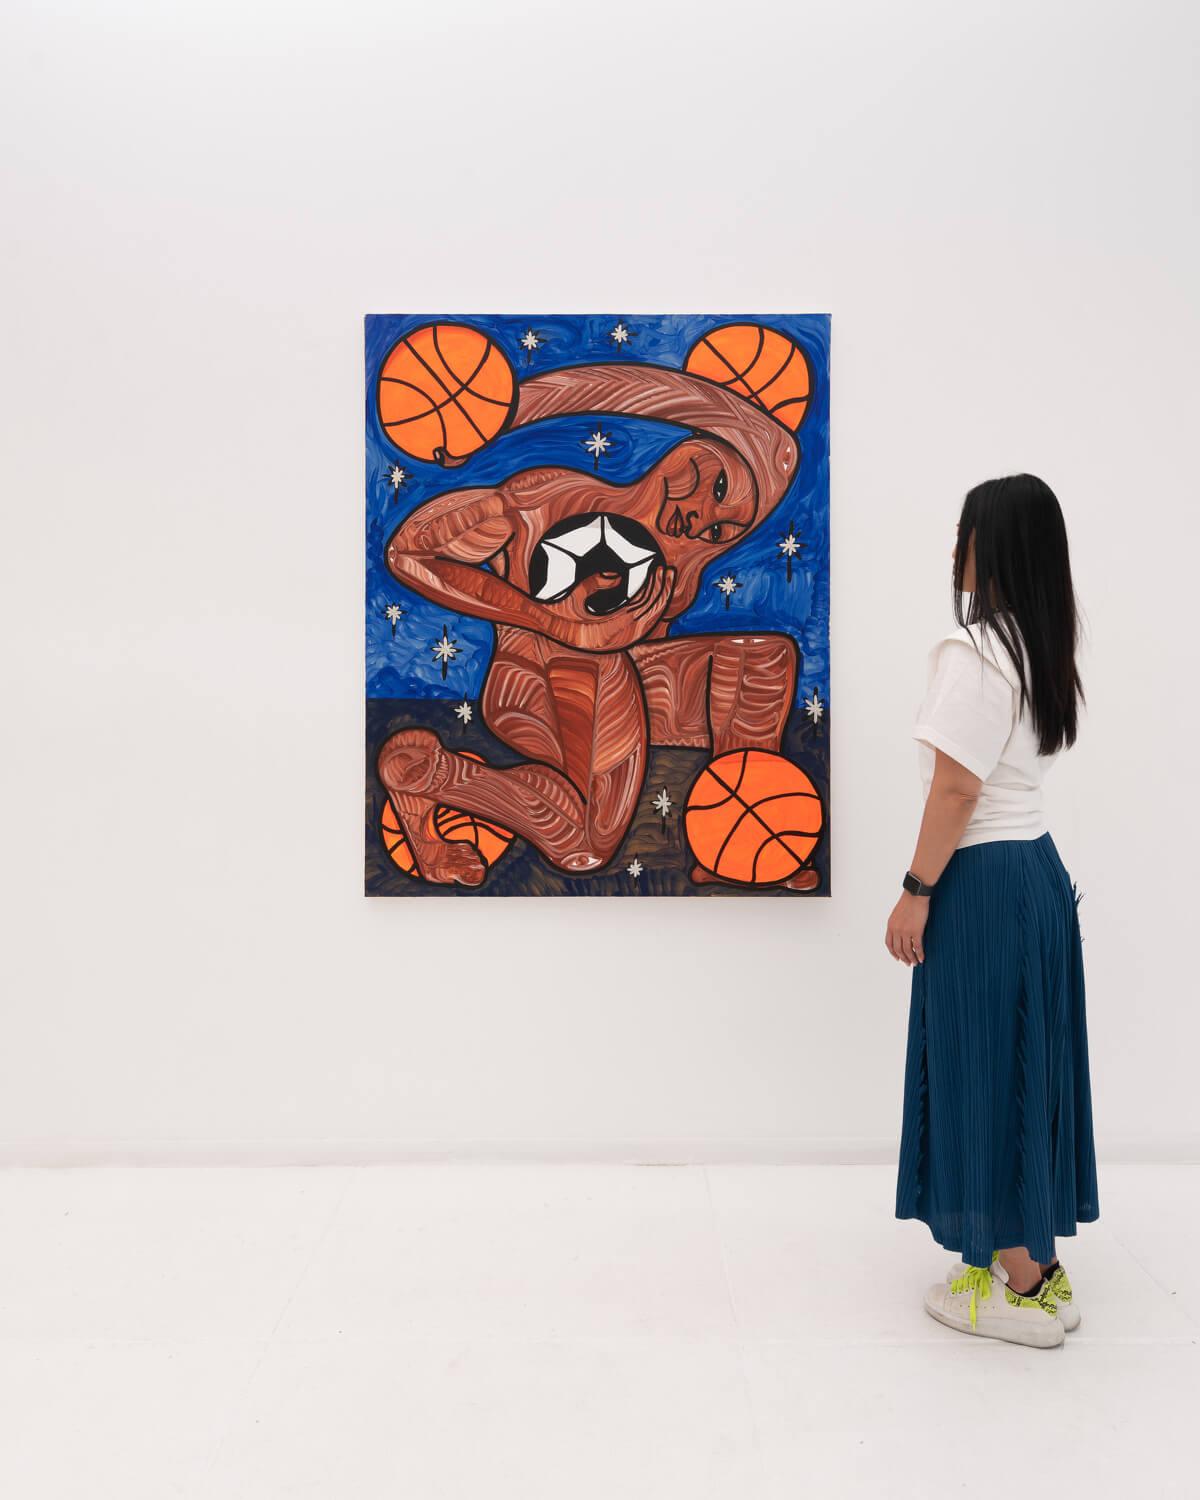 A person looking at a painting

Description automatically generated